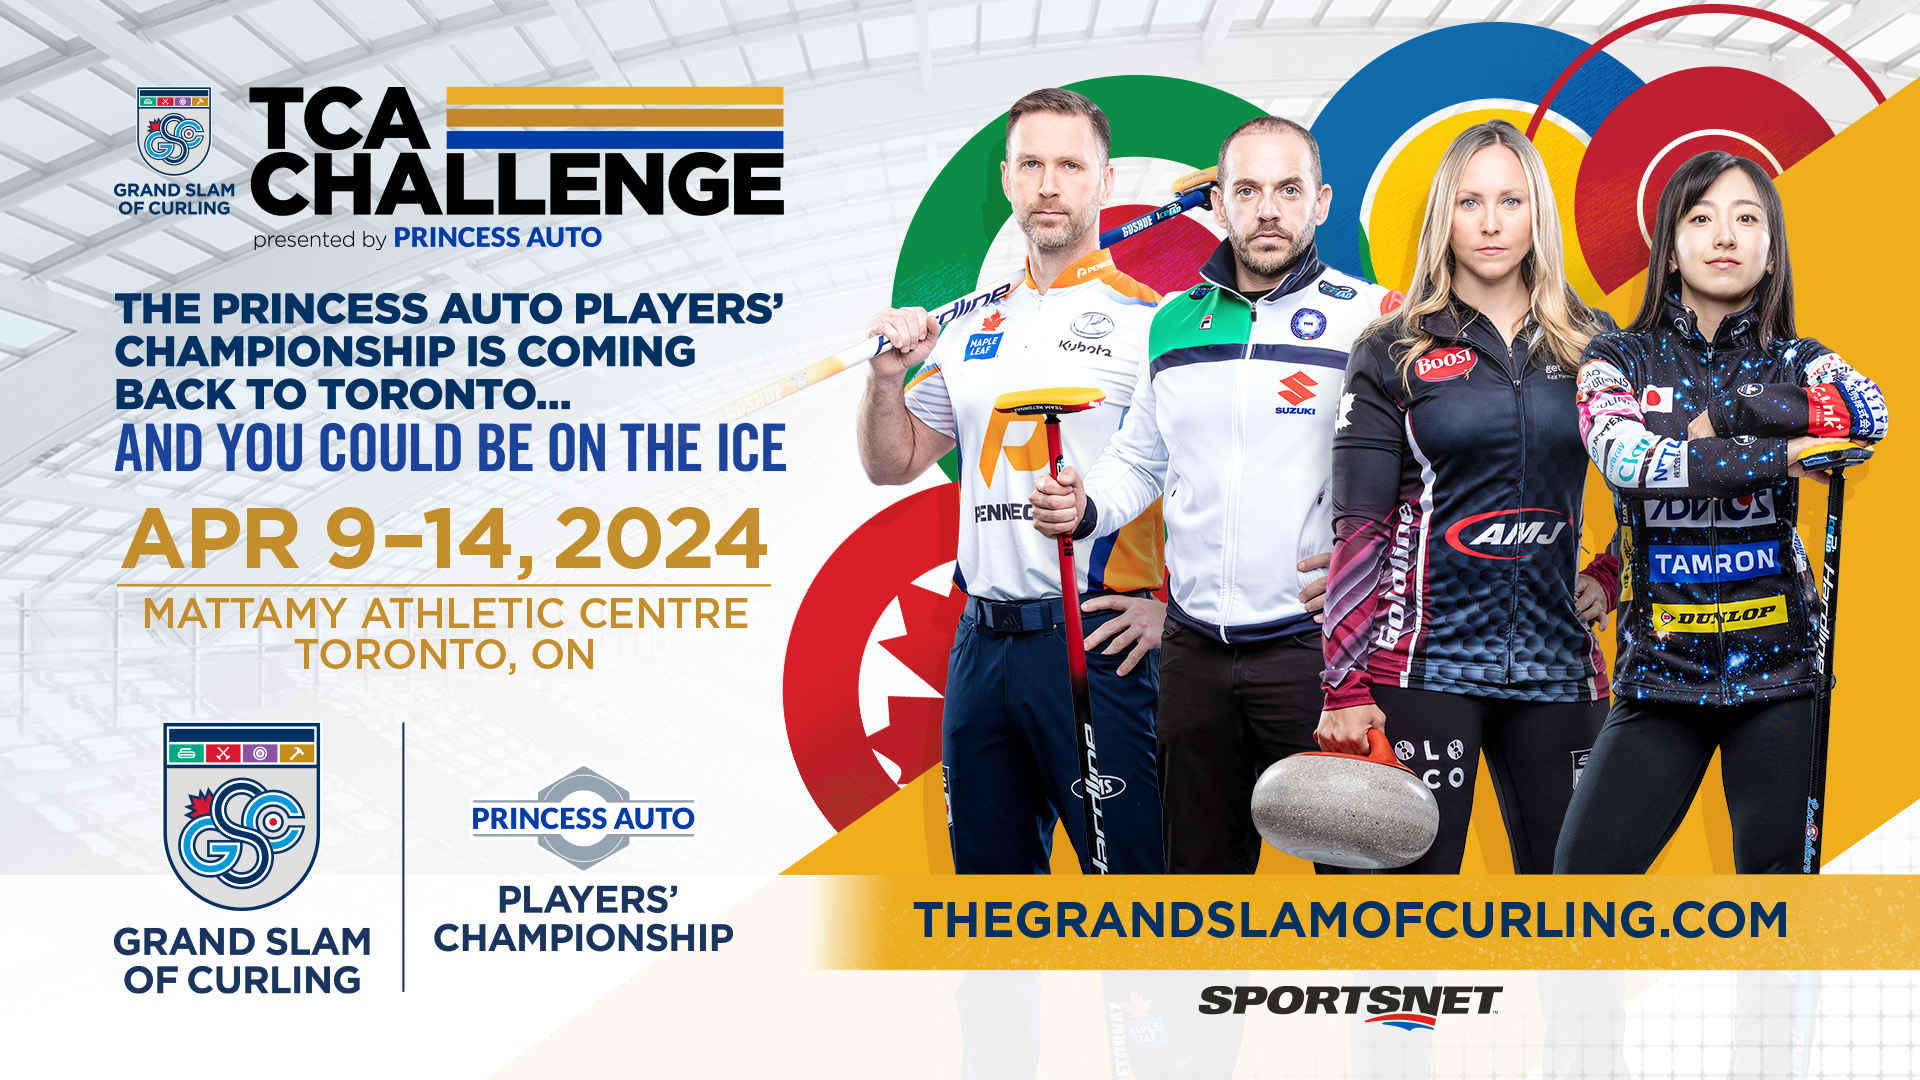 Grand Slam of Curling's TCA Challenge presented by Princess Auto The